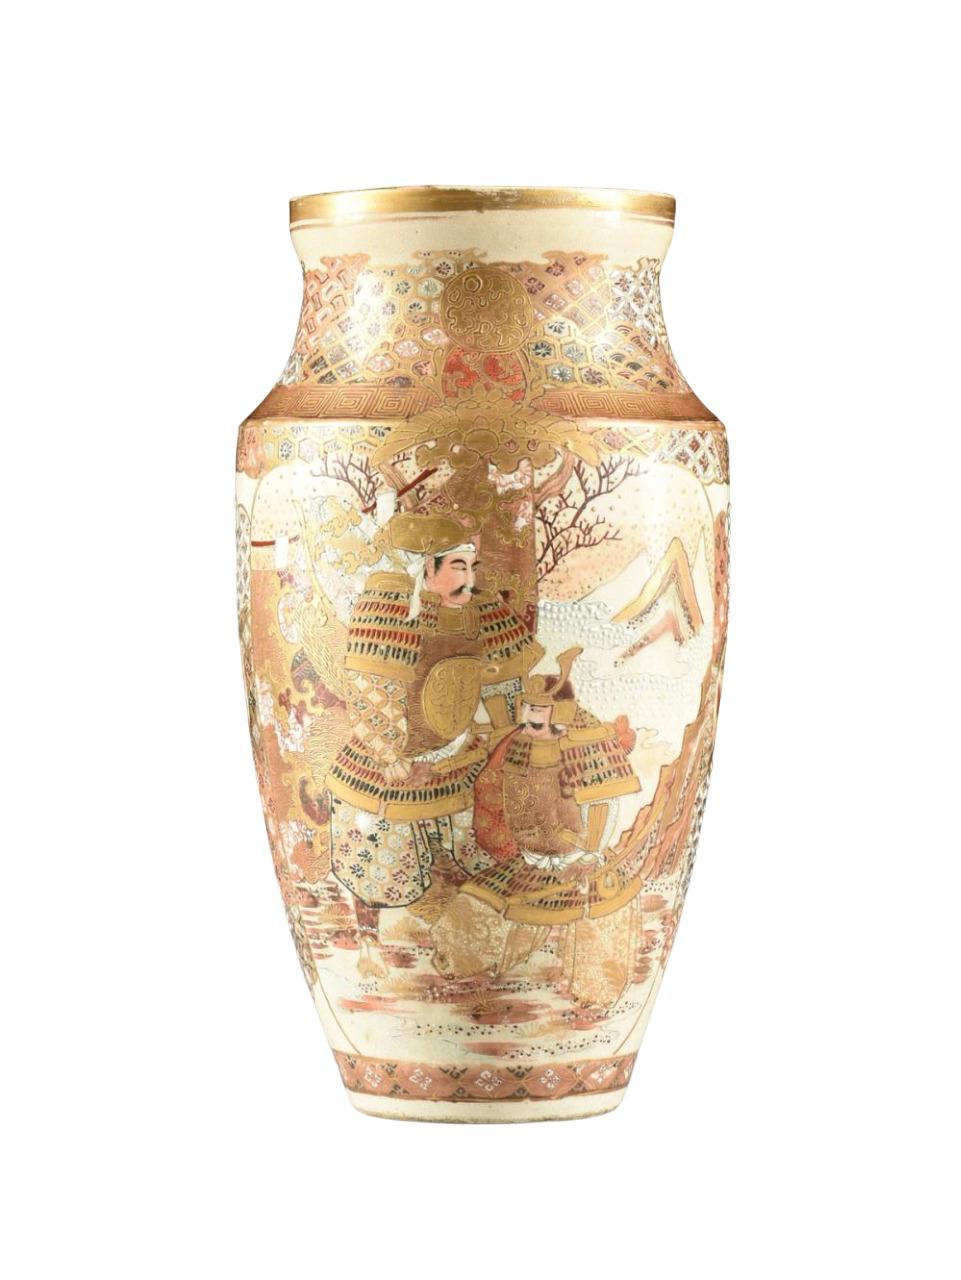 A pair of Japanese Satsuma vases with parcel gilt and enameled decorations from the early 20th century are available for sale. The vases feature gilt mouths, waisted necks, and spiral Greek key collars. The shoulders are sharp and tapering, while